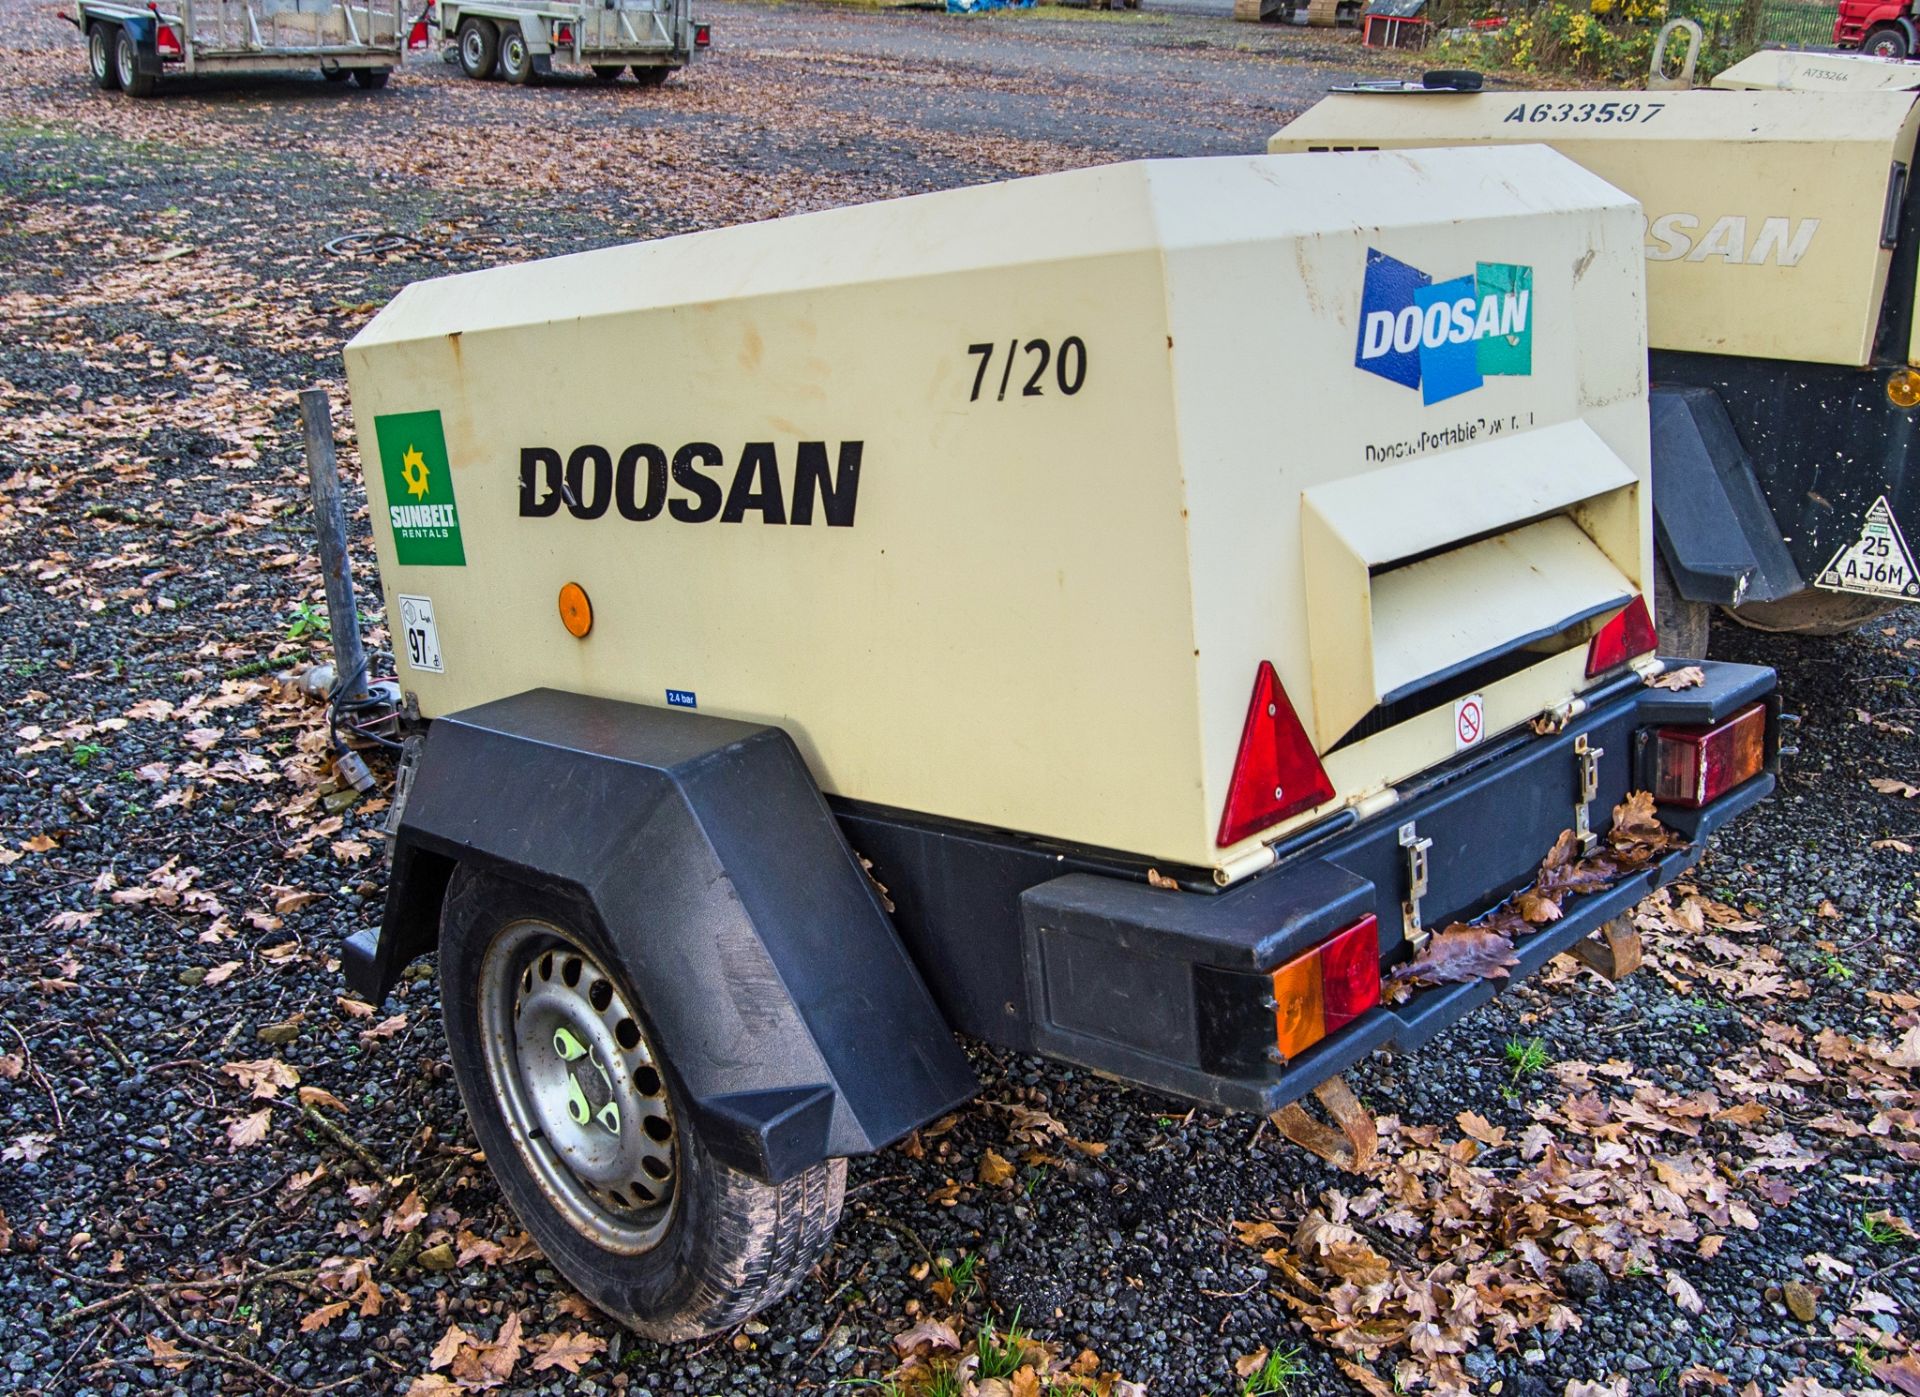 Doosan 7/20 diesel driven fast tow mobile air compressor Year: 2015 S/N: 124065 Recorded Hours: 17 - Image 4 of 9